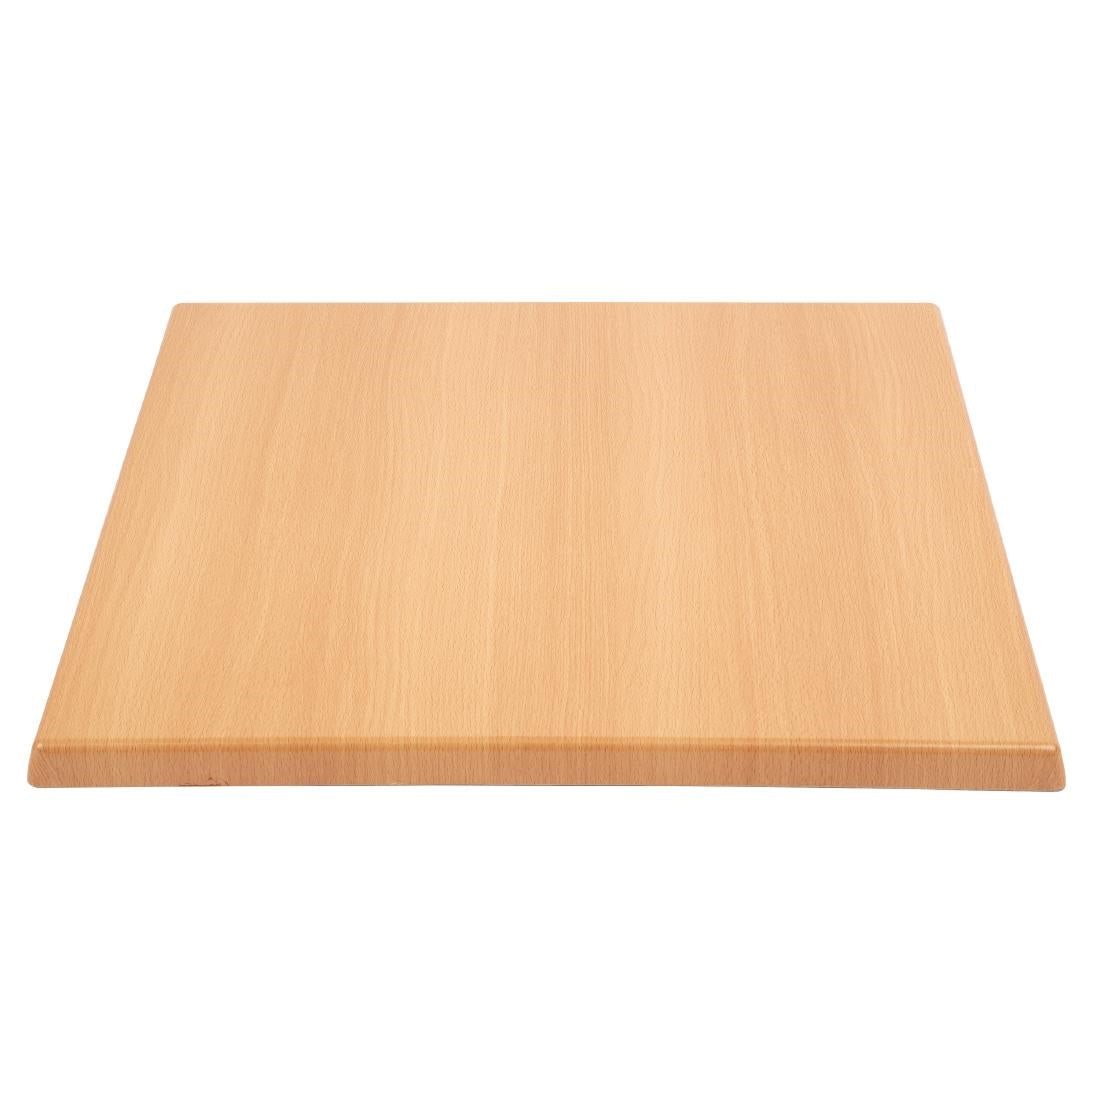 GG634 Bolero Pre-drilled Square Table Top Beech Effect 600mm JD Catering Equipment Solutions Ltd